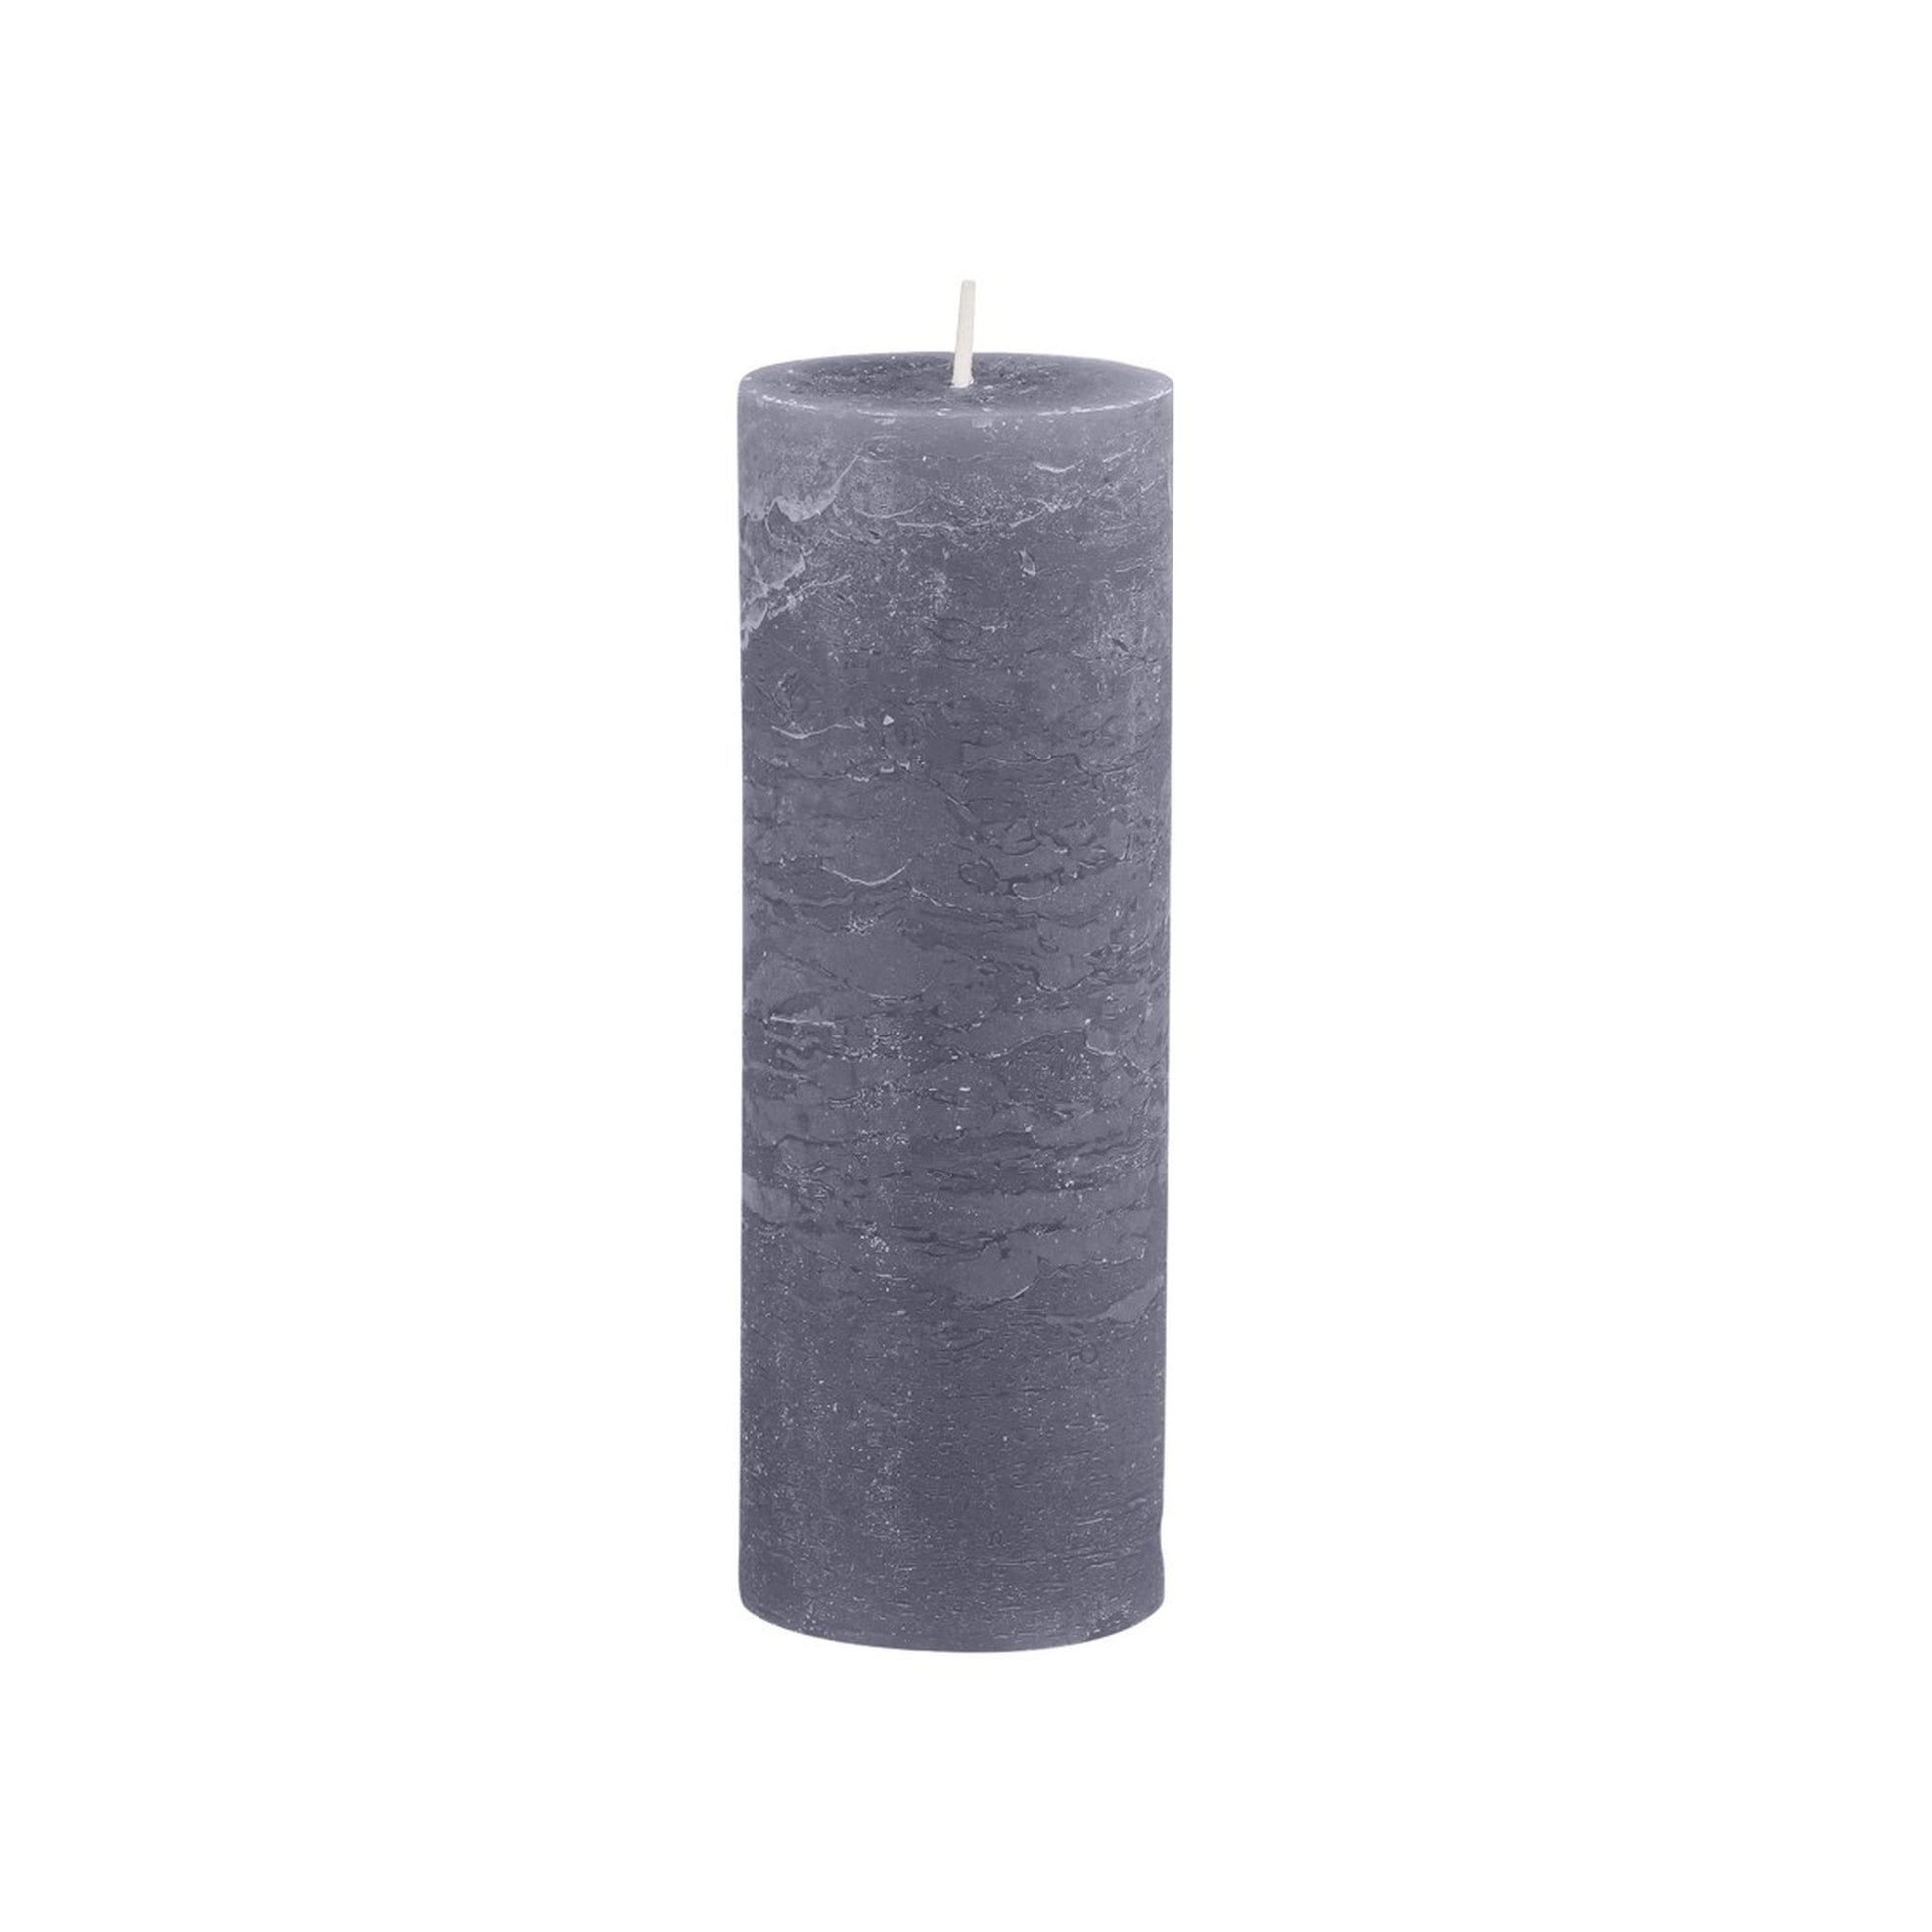 Stone Rustic Pillar Candle 80 hours - Bumble Living